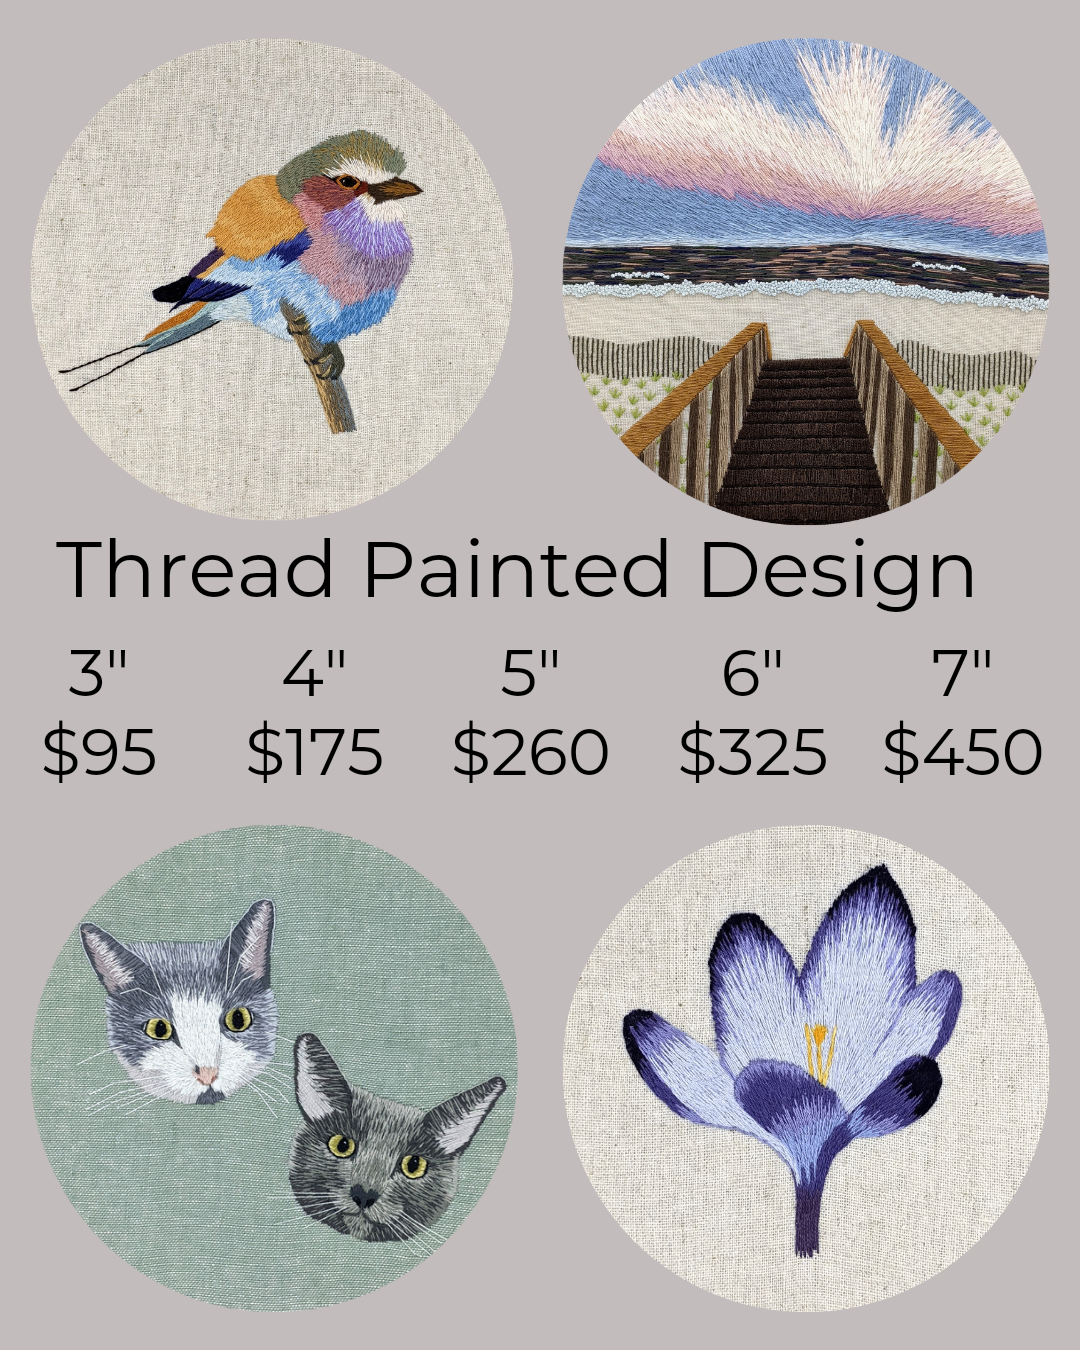 Thread painted design: 3" for $95, 4" for $175, 5" for $260, 6" for $325, 7" for $450